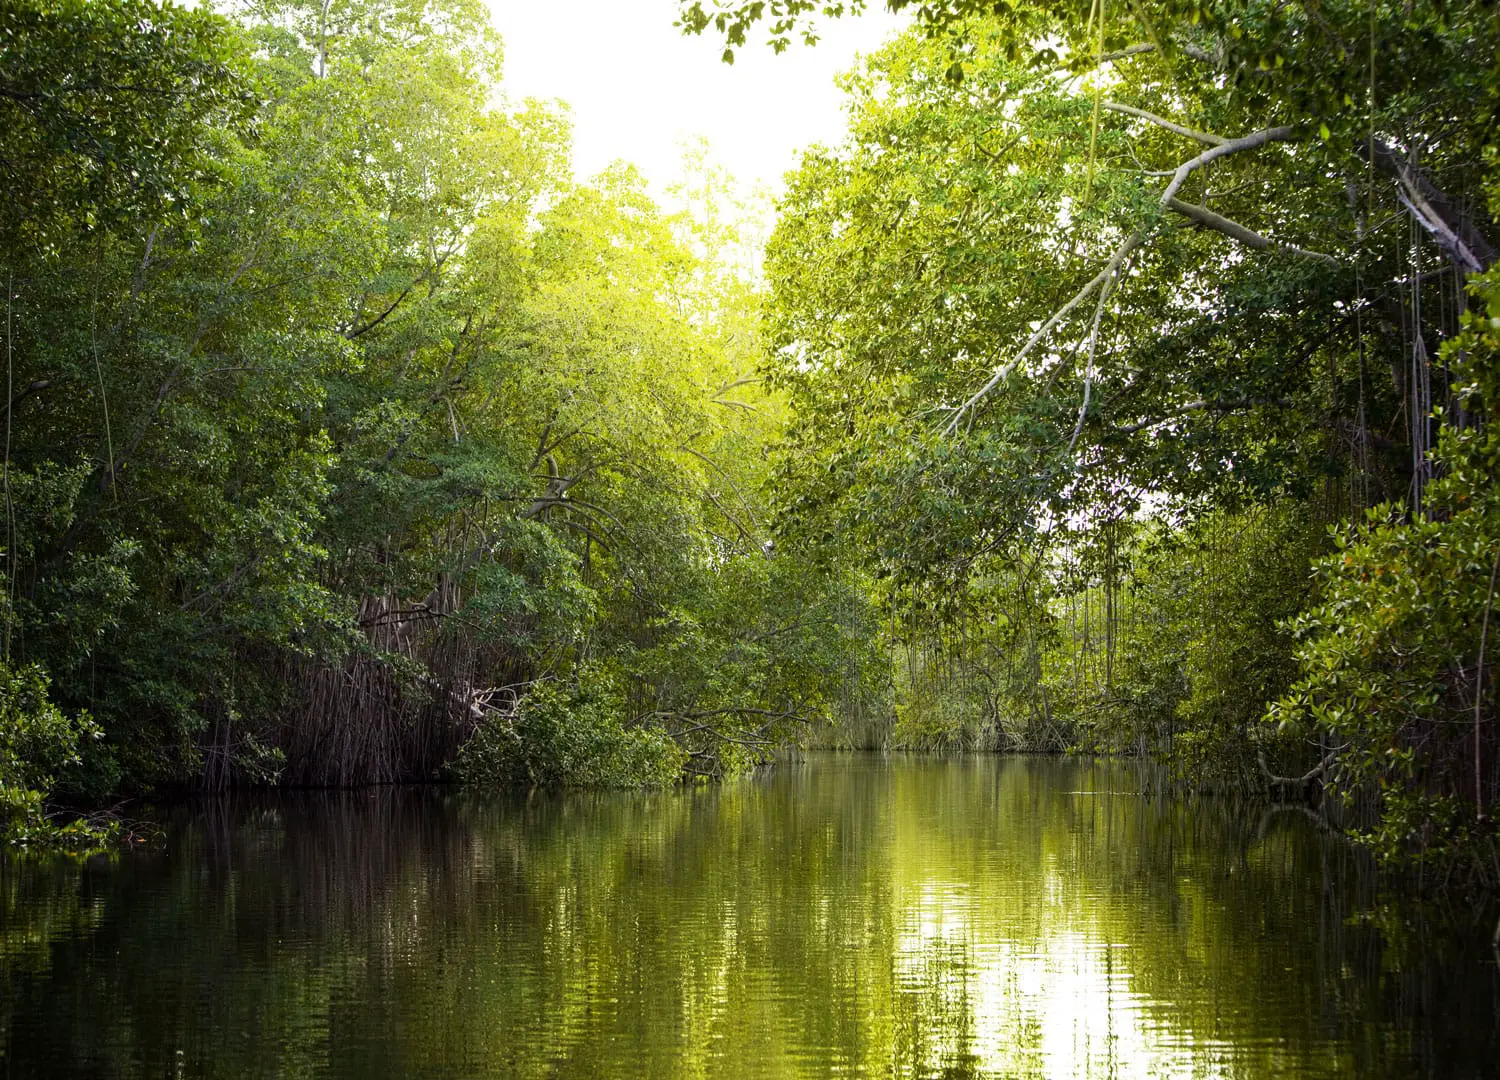 Tropical mangrove forest on the Black River, Jamaica